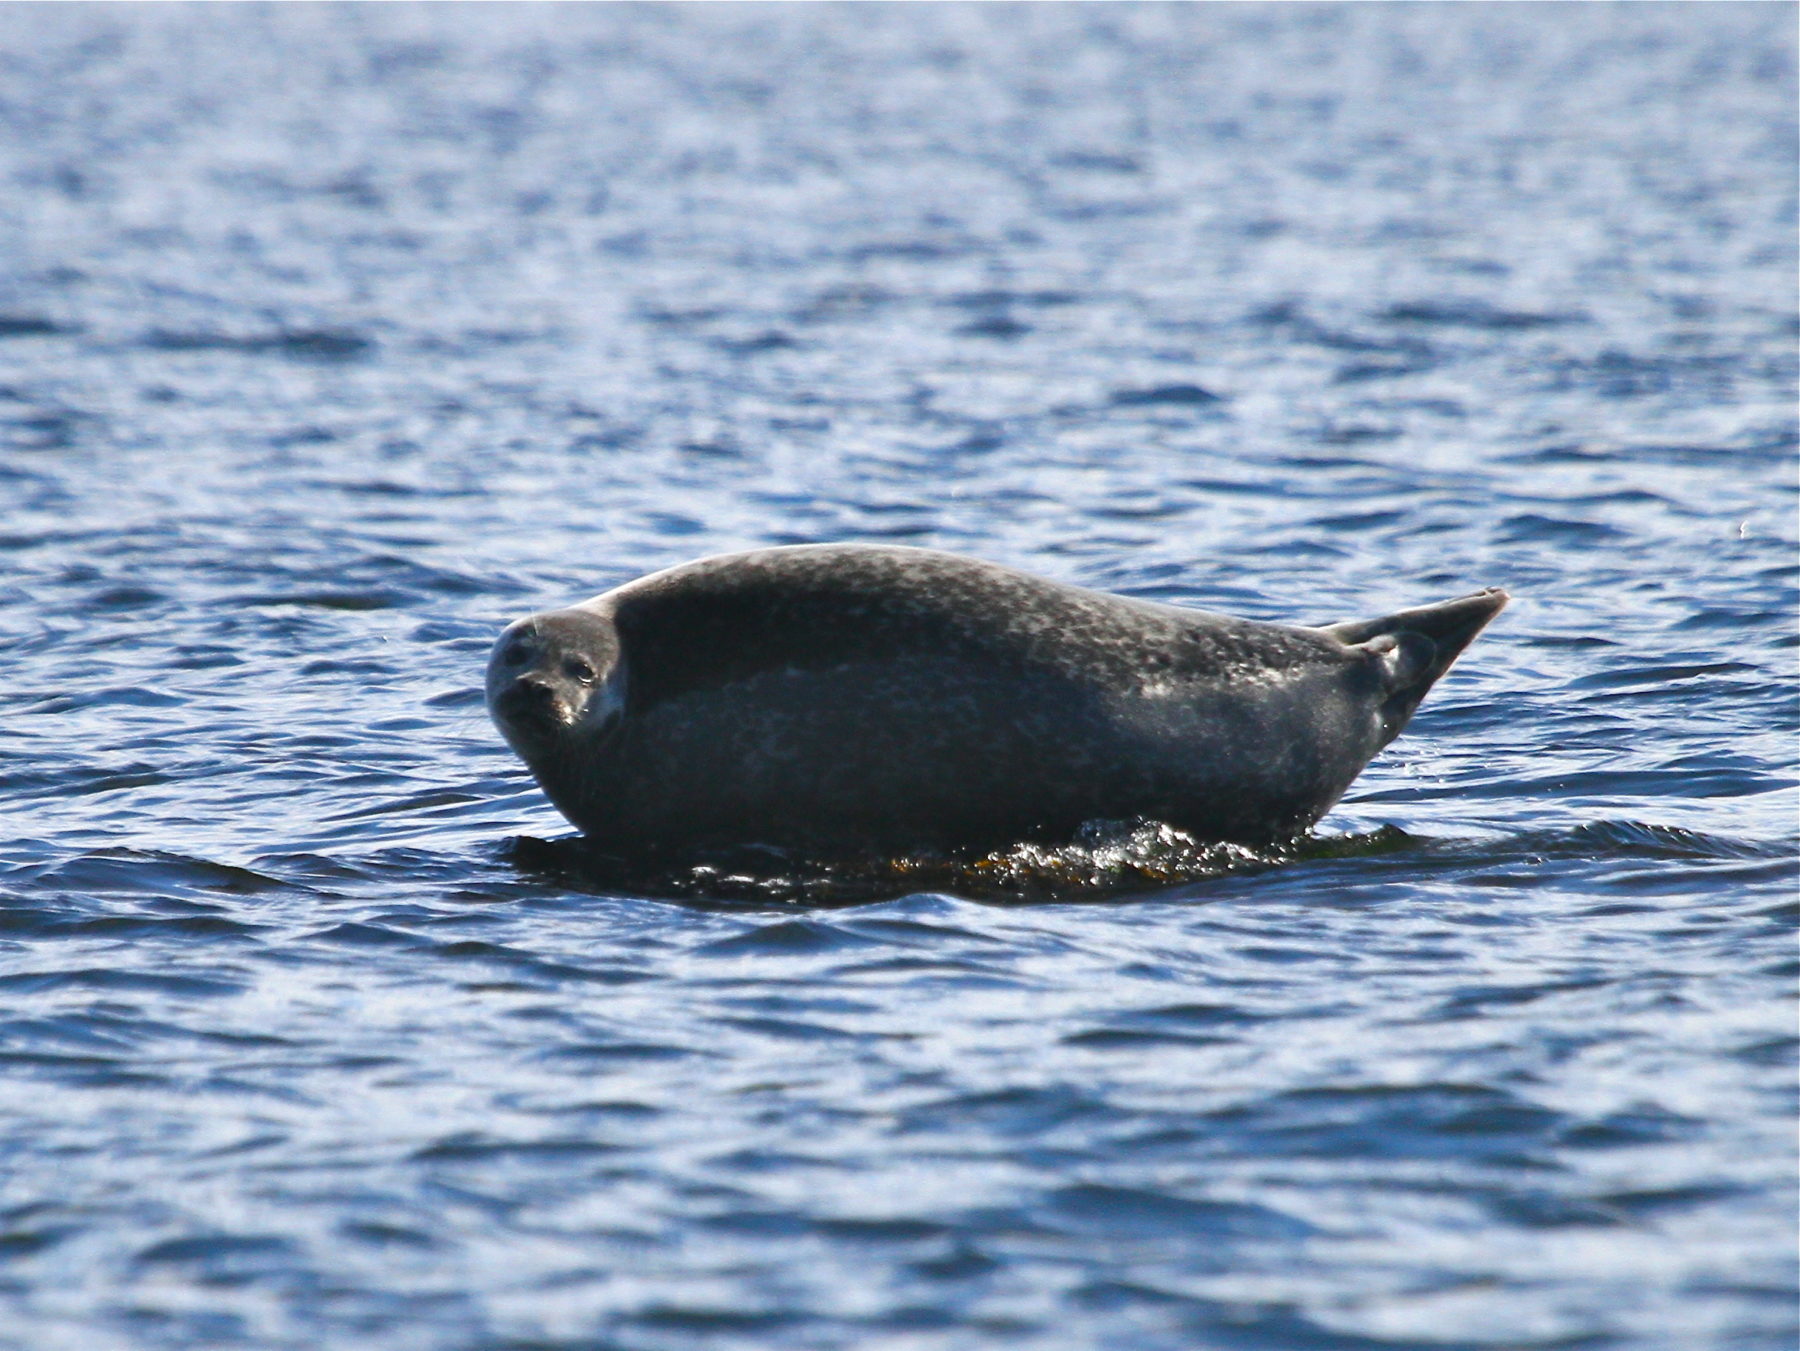 A seal in the Bay.